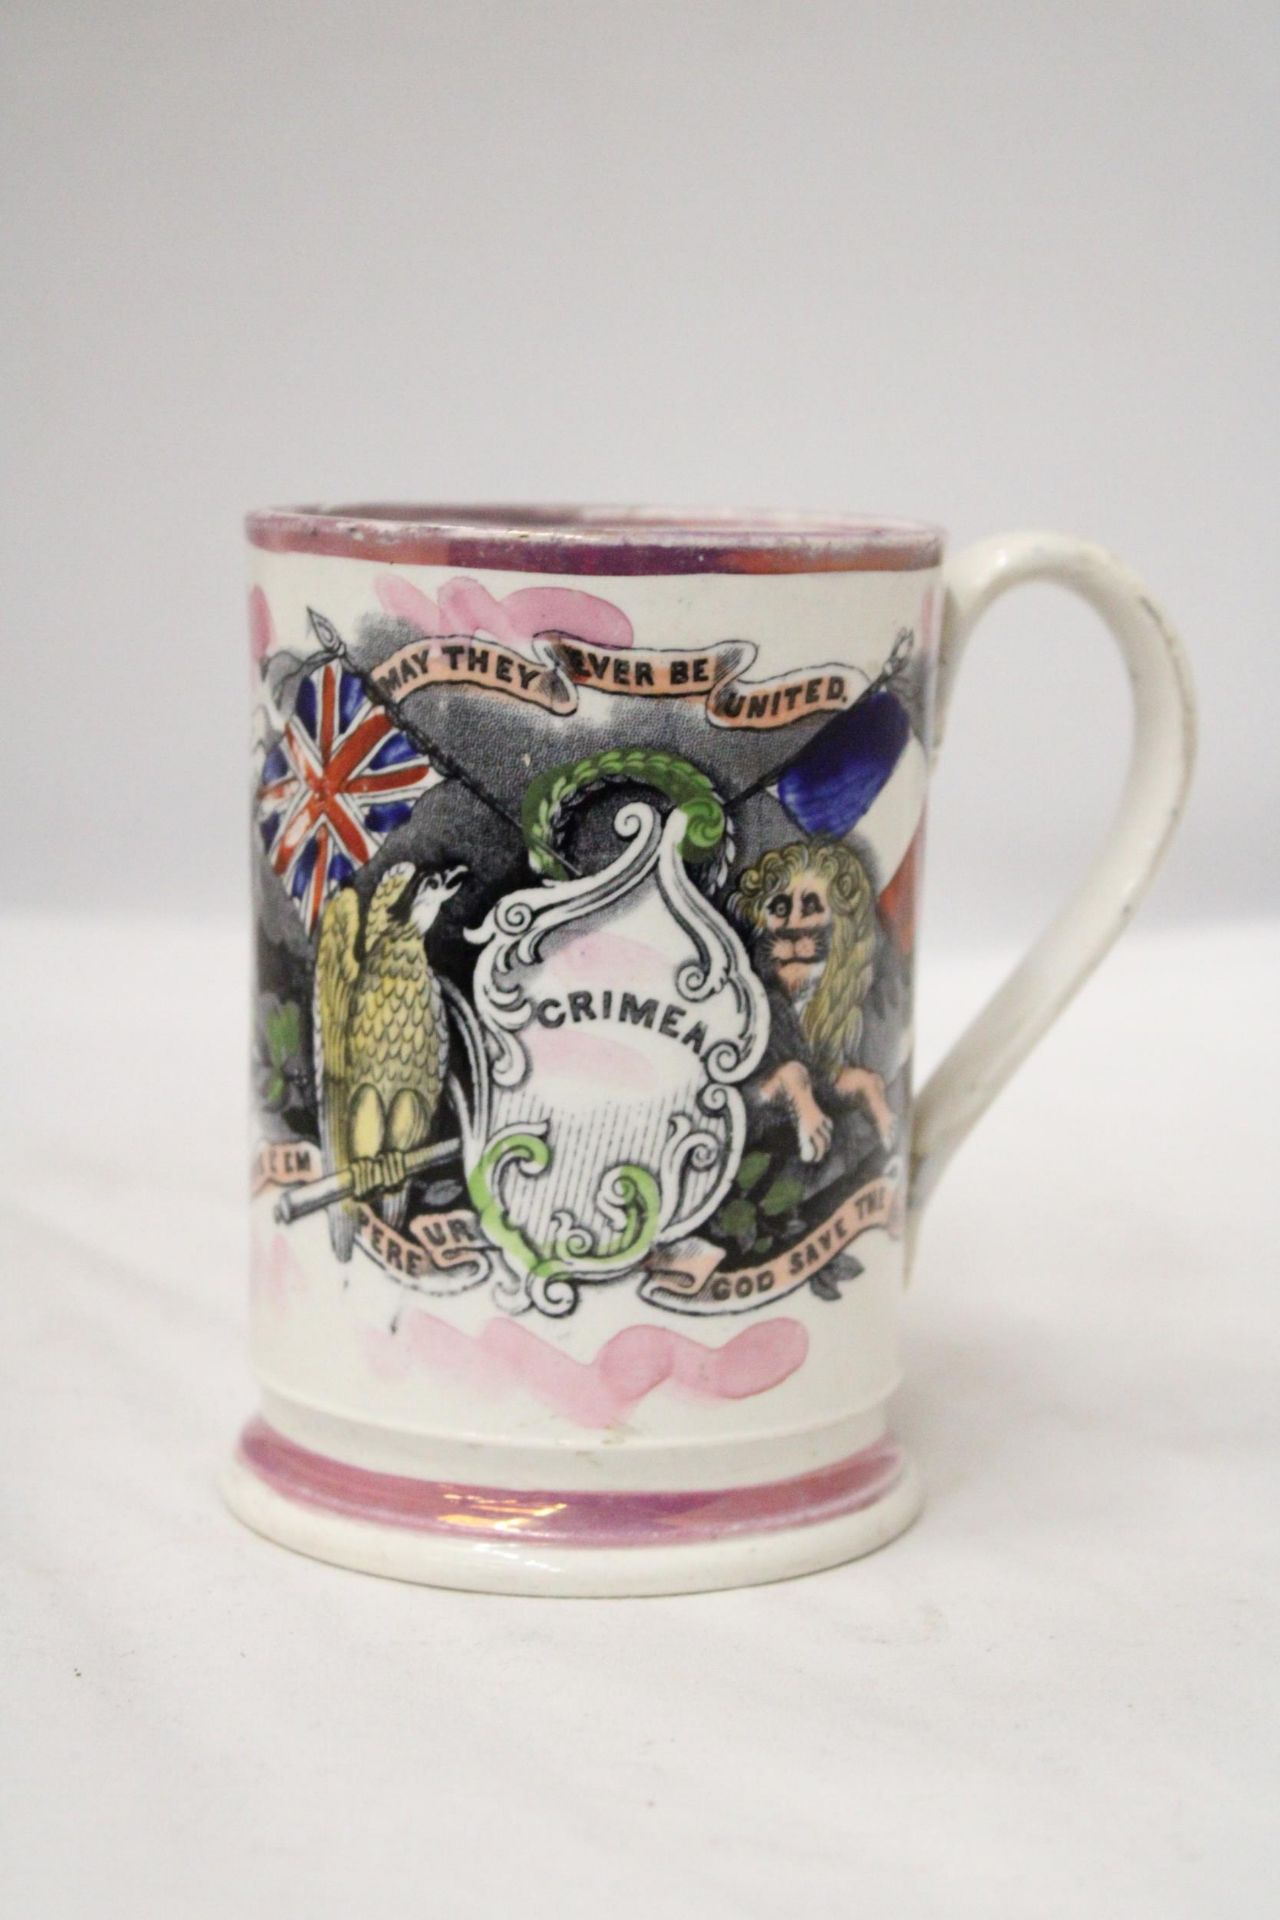 A 19TH CENTURY STAFFORDSHIRE POTTERY FROG MUG WITH 'GOD SAVE THE QUEEN' EMBLEM